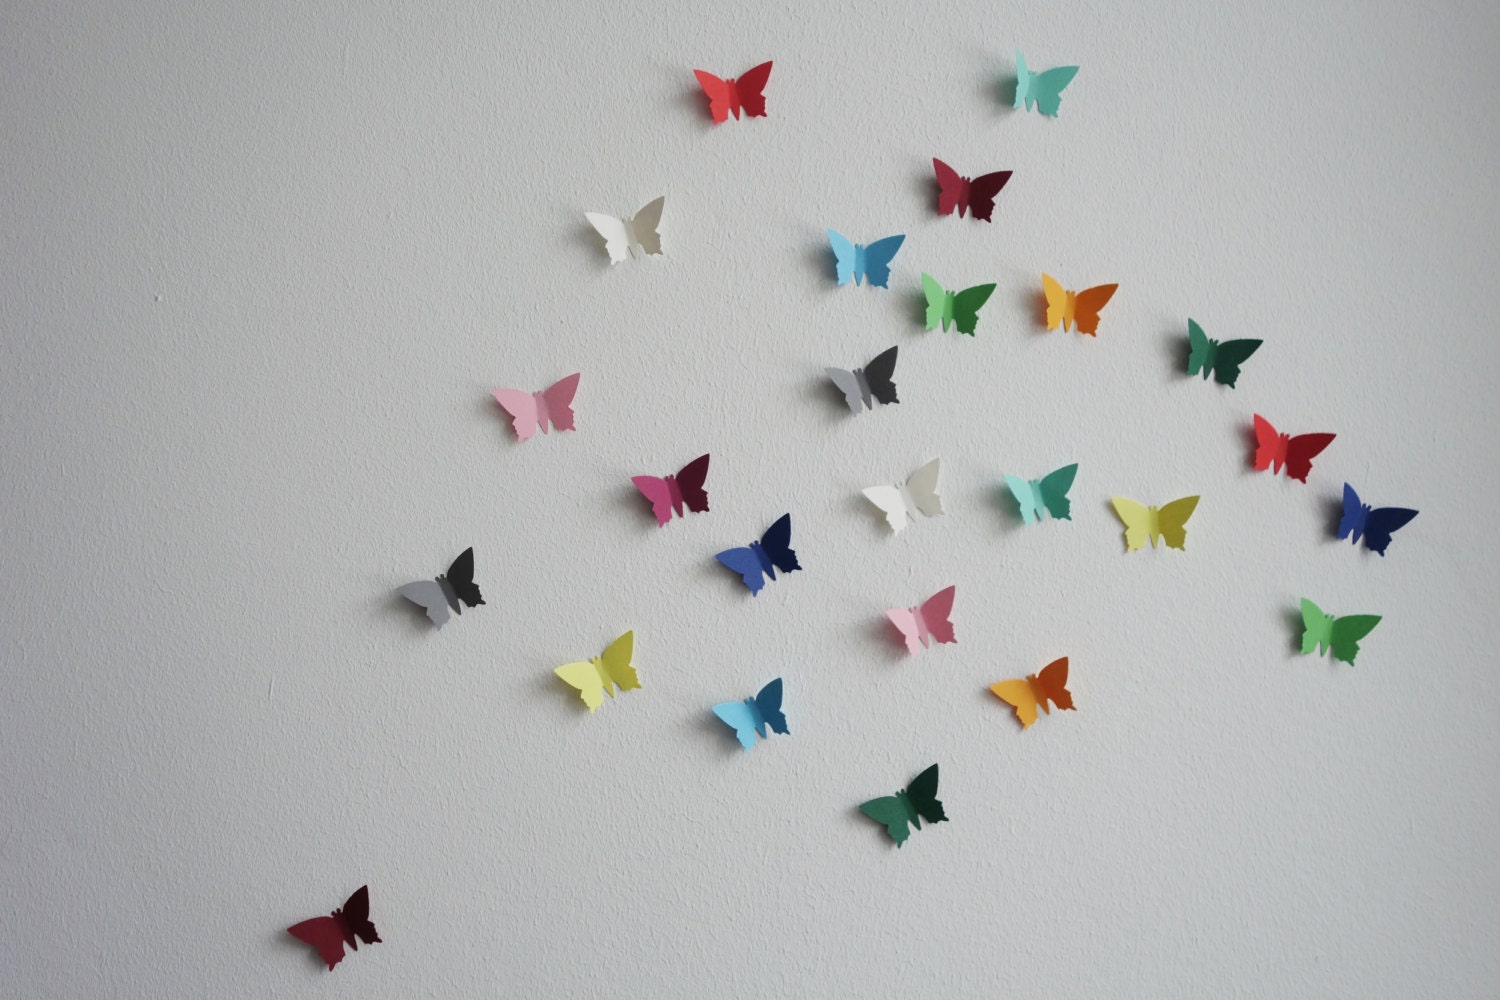 25 X 3D Butterflies in Colorful Colored Potpourri Wall - Etsy